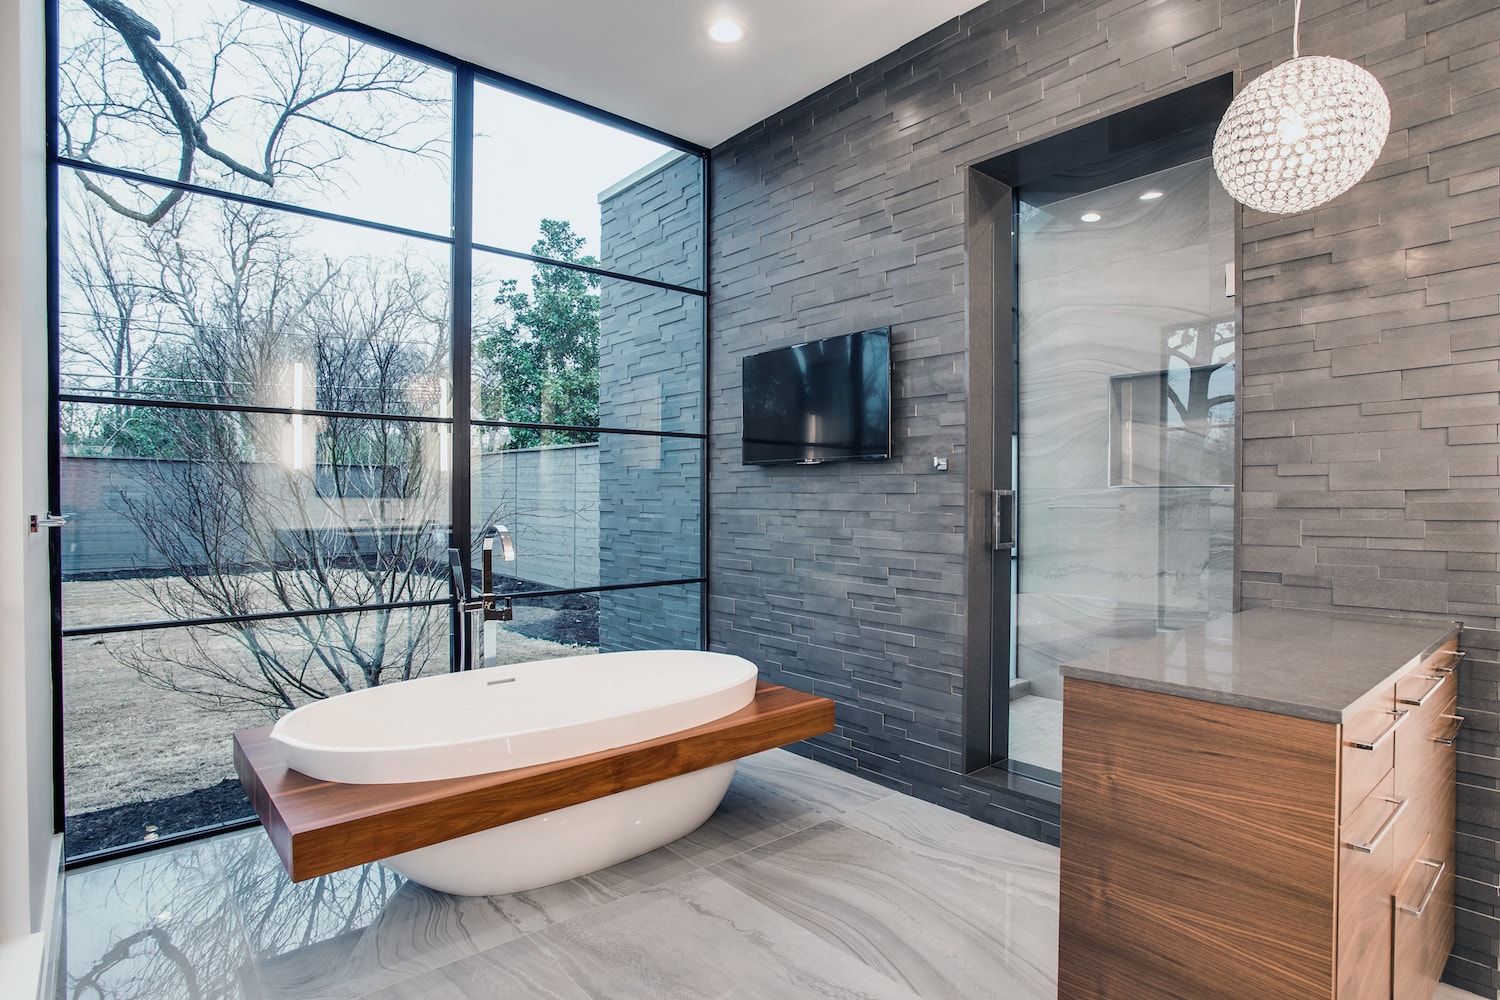 Norstone Ochre Slimline Rock Panels used on both the interior and exterior of a residential master bathroom